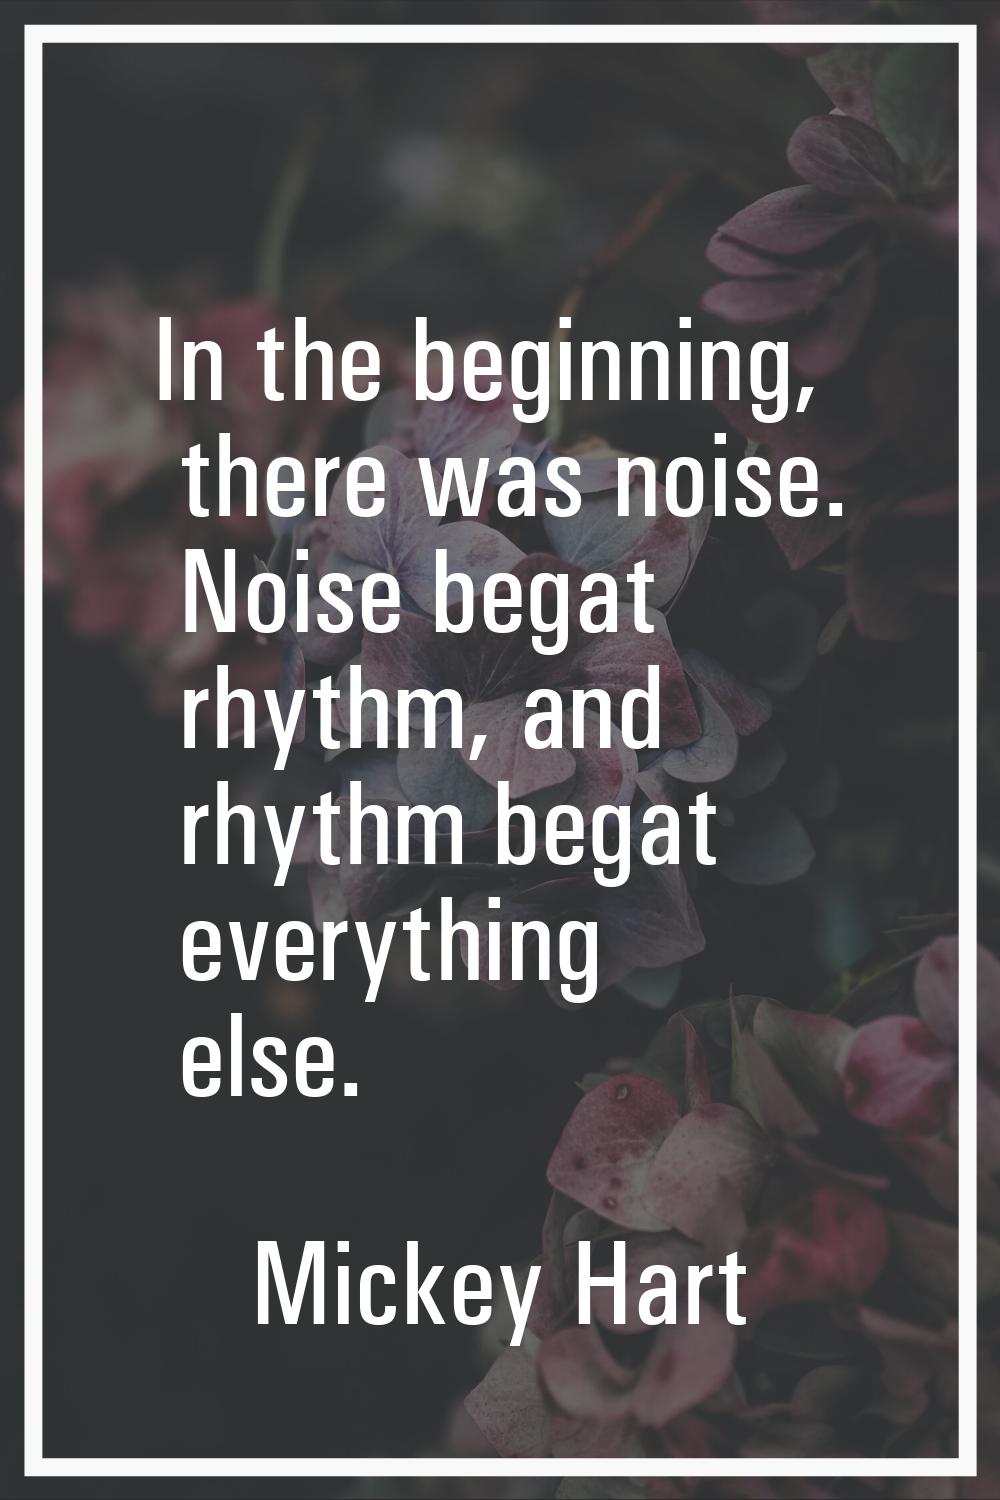 In the beginning, there was noise. Noise begat rhythm, and rhythm begat everything else.